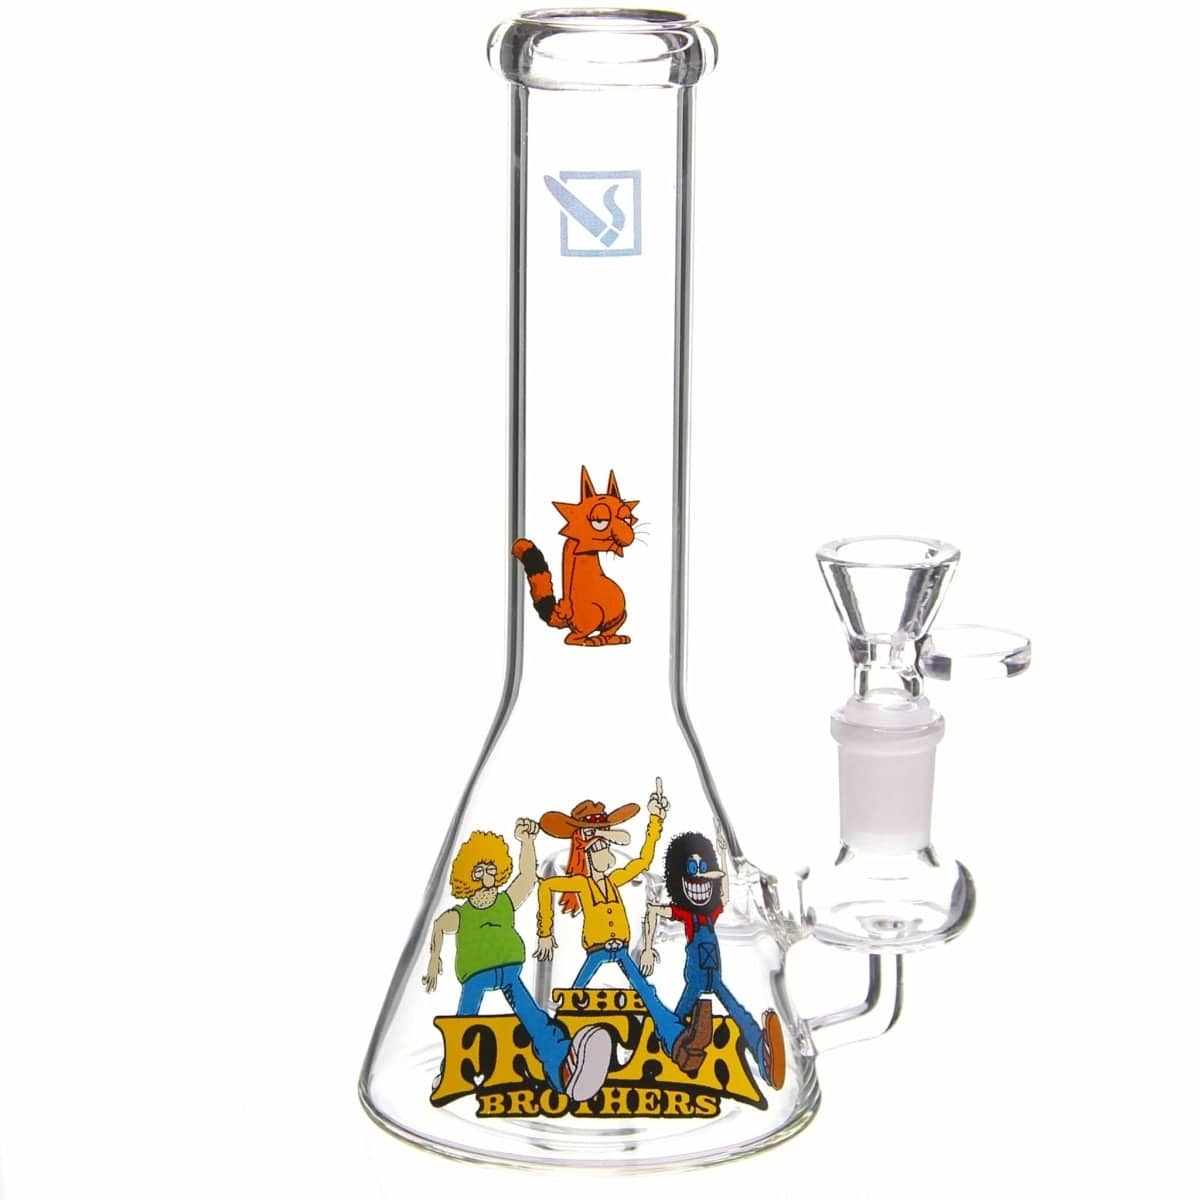 Daily High Club Glass Daily High Club x The Freak Brothers 